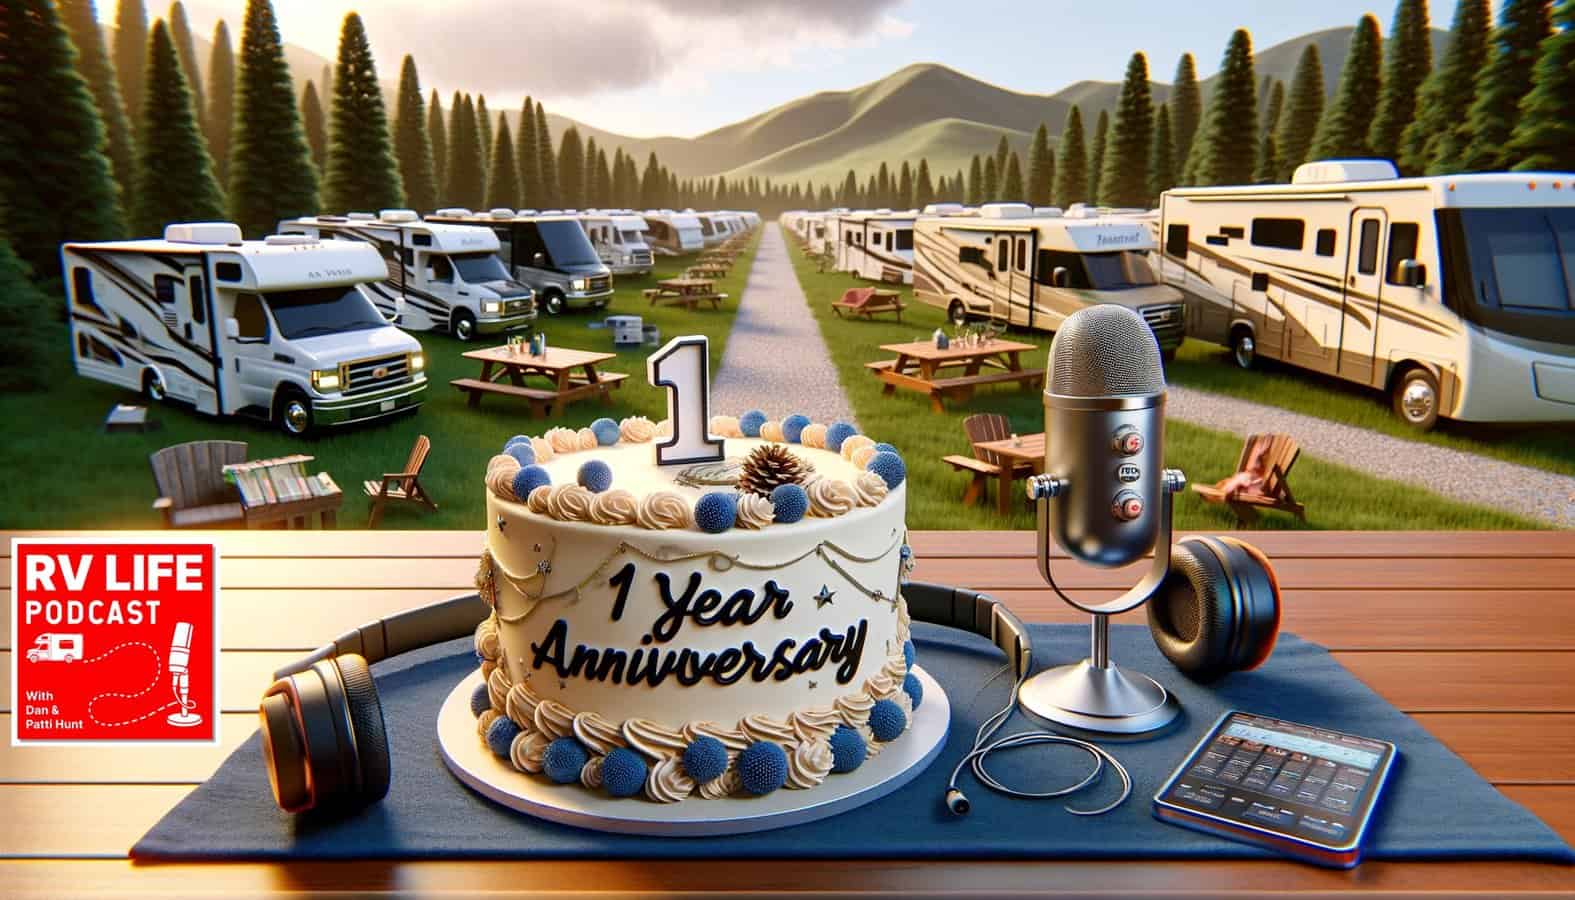 a cake in foreground with recording equipment, RVs parked in background.